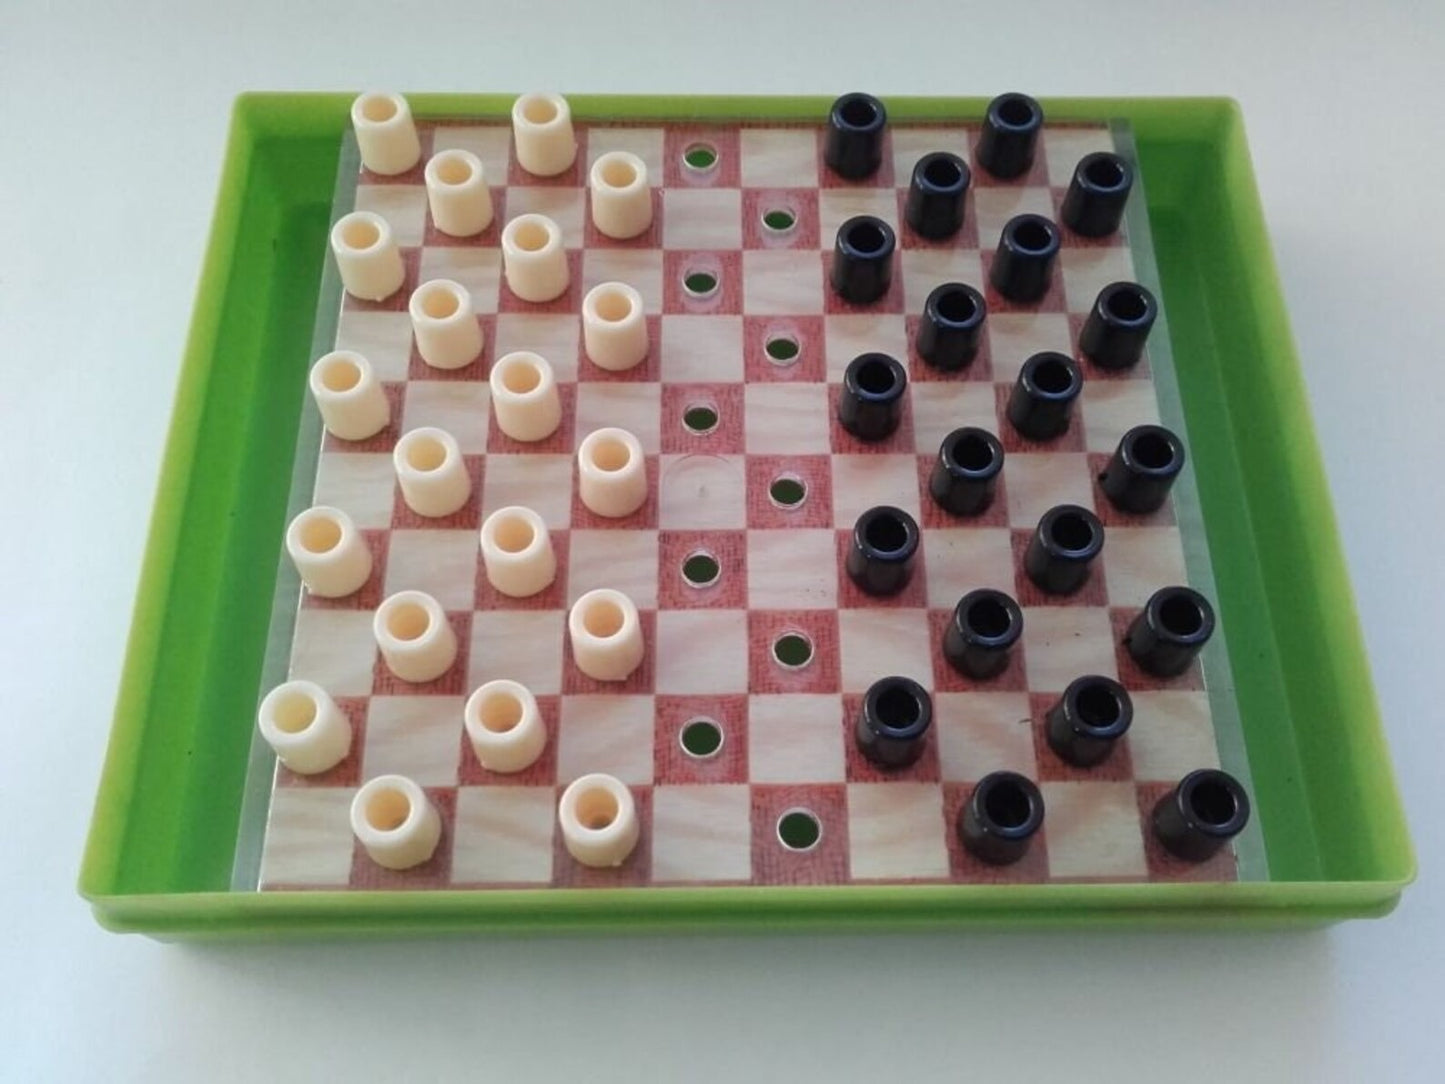 Draughts Checkers board game - Mini Checkers Set - Travel Board Game set - Made in USSR - 1970s